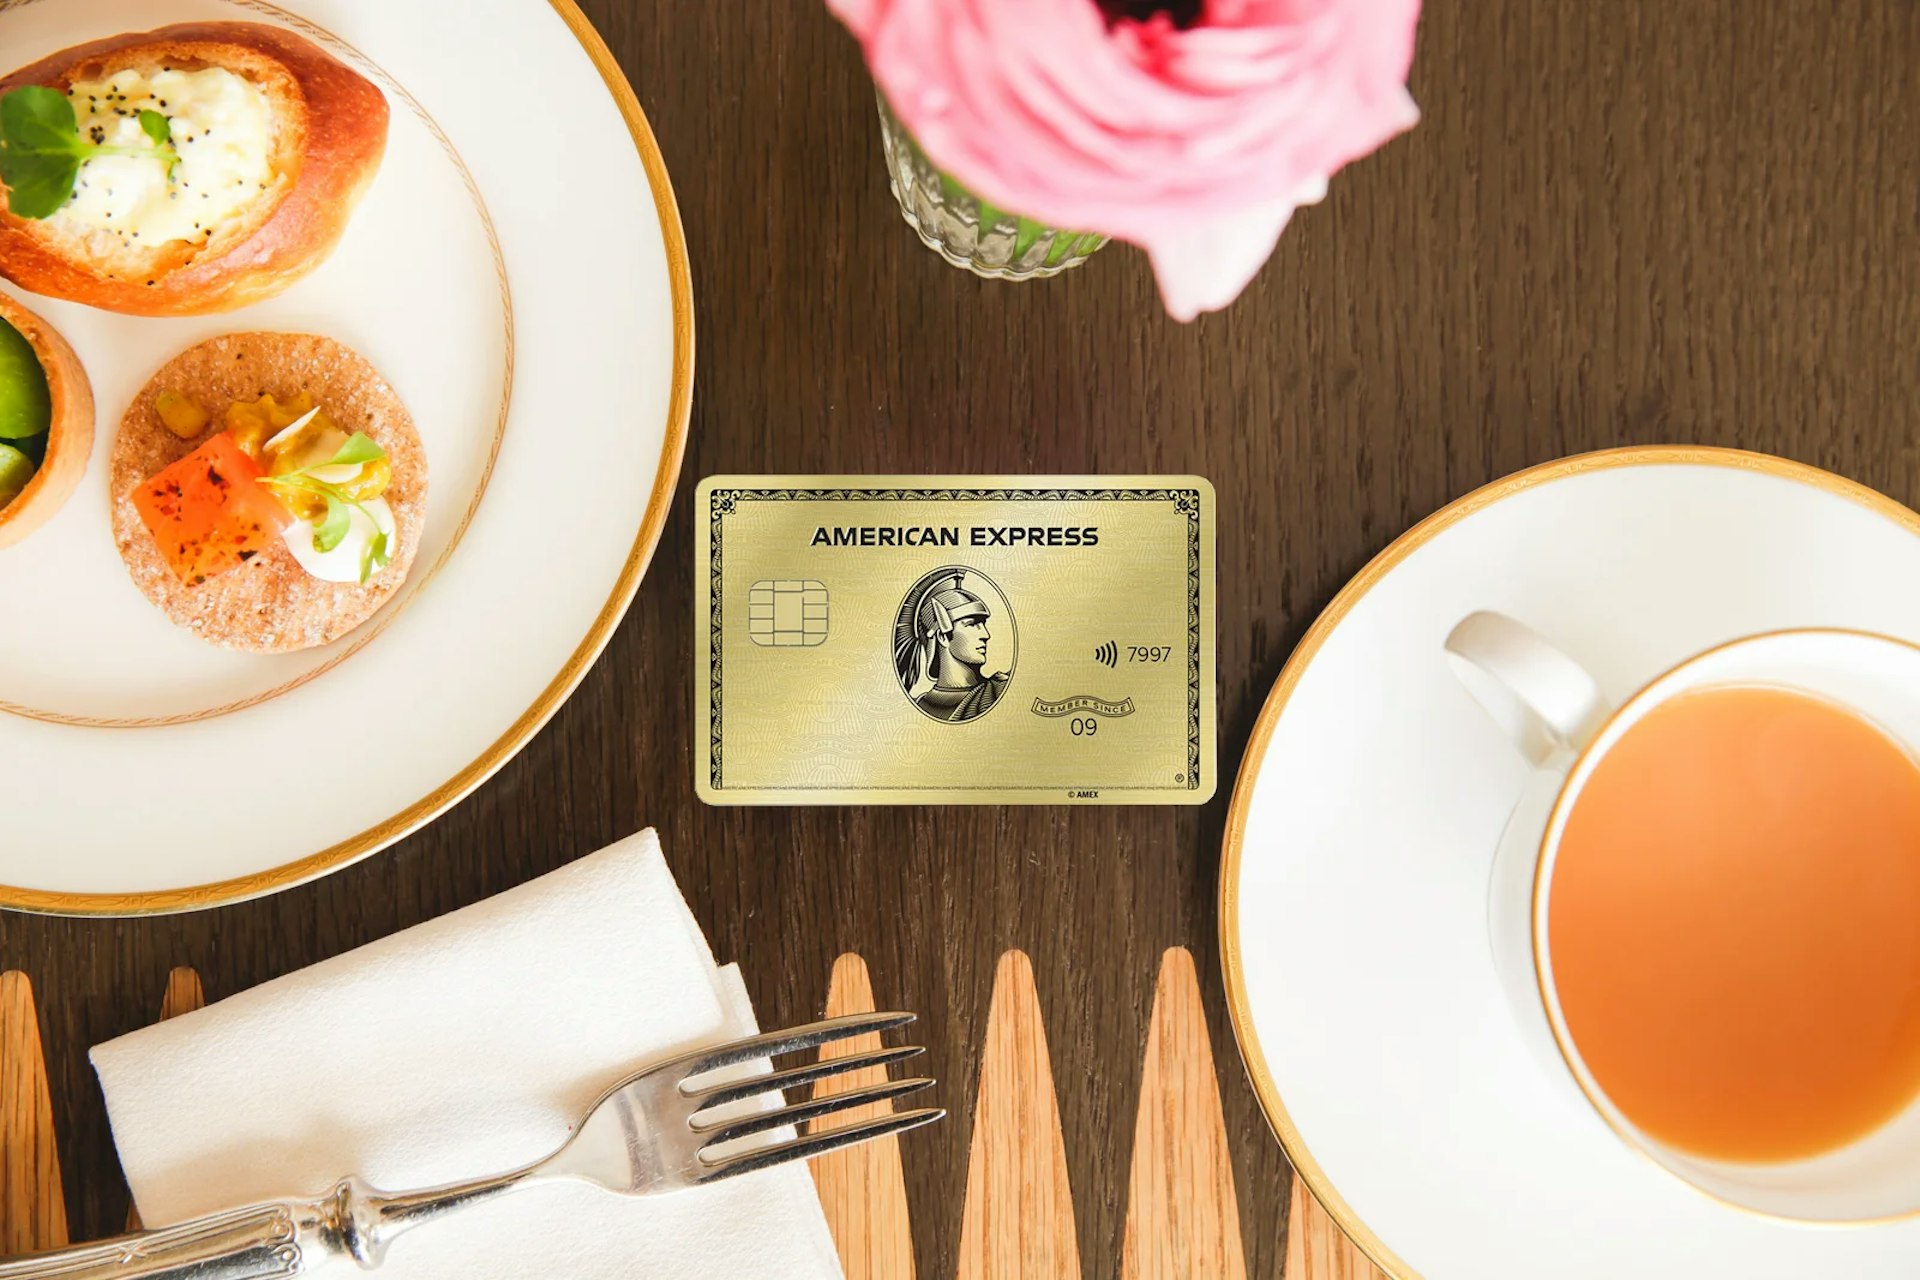 A photo of the American Express Gold Card on a dining table